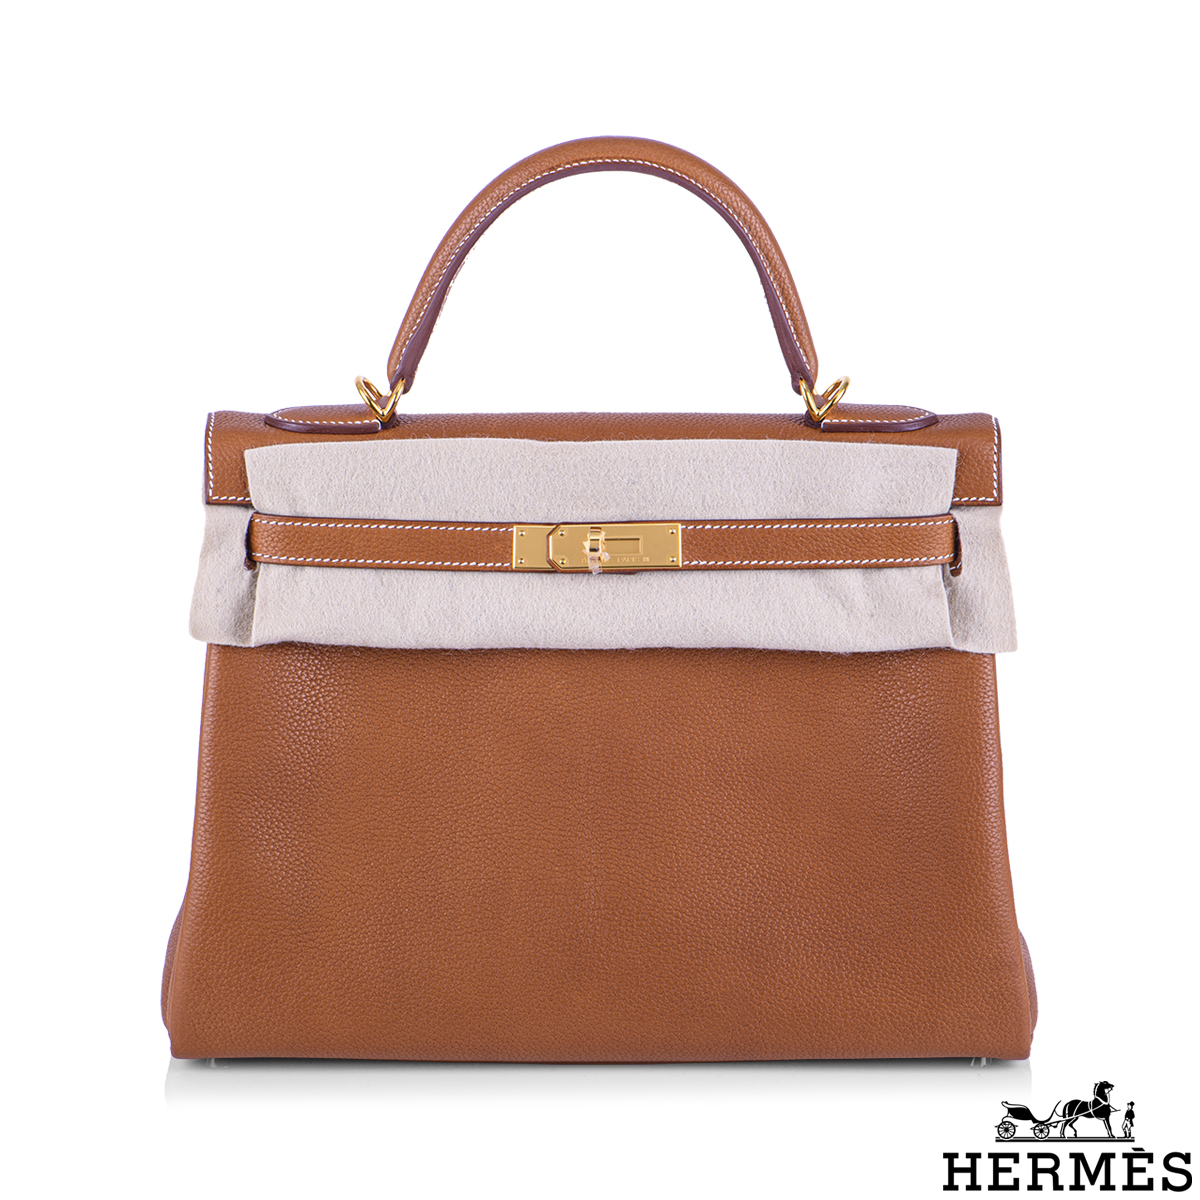 All about the Hermès Kelly bag collection